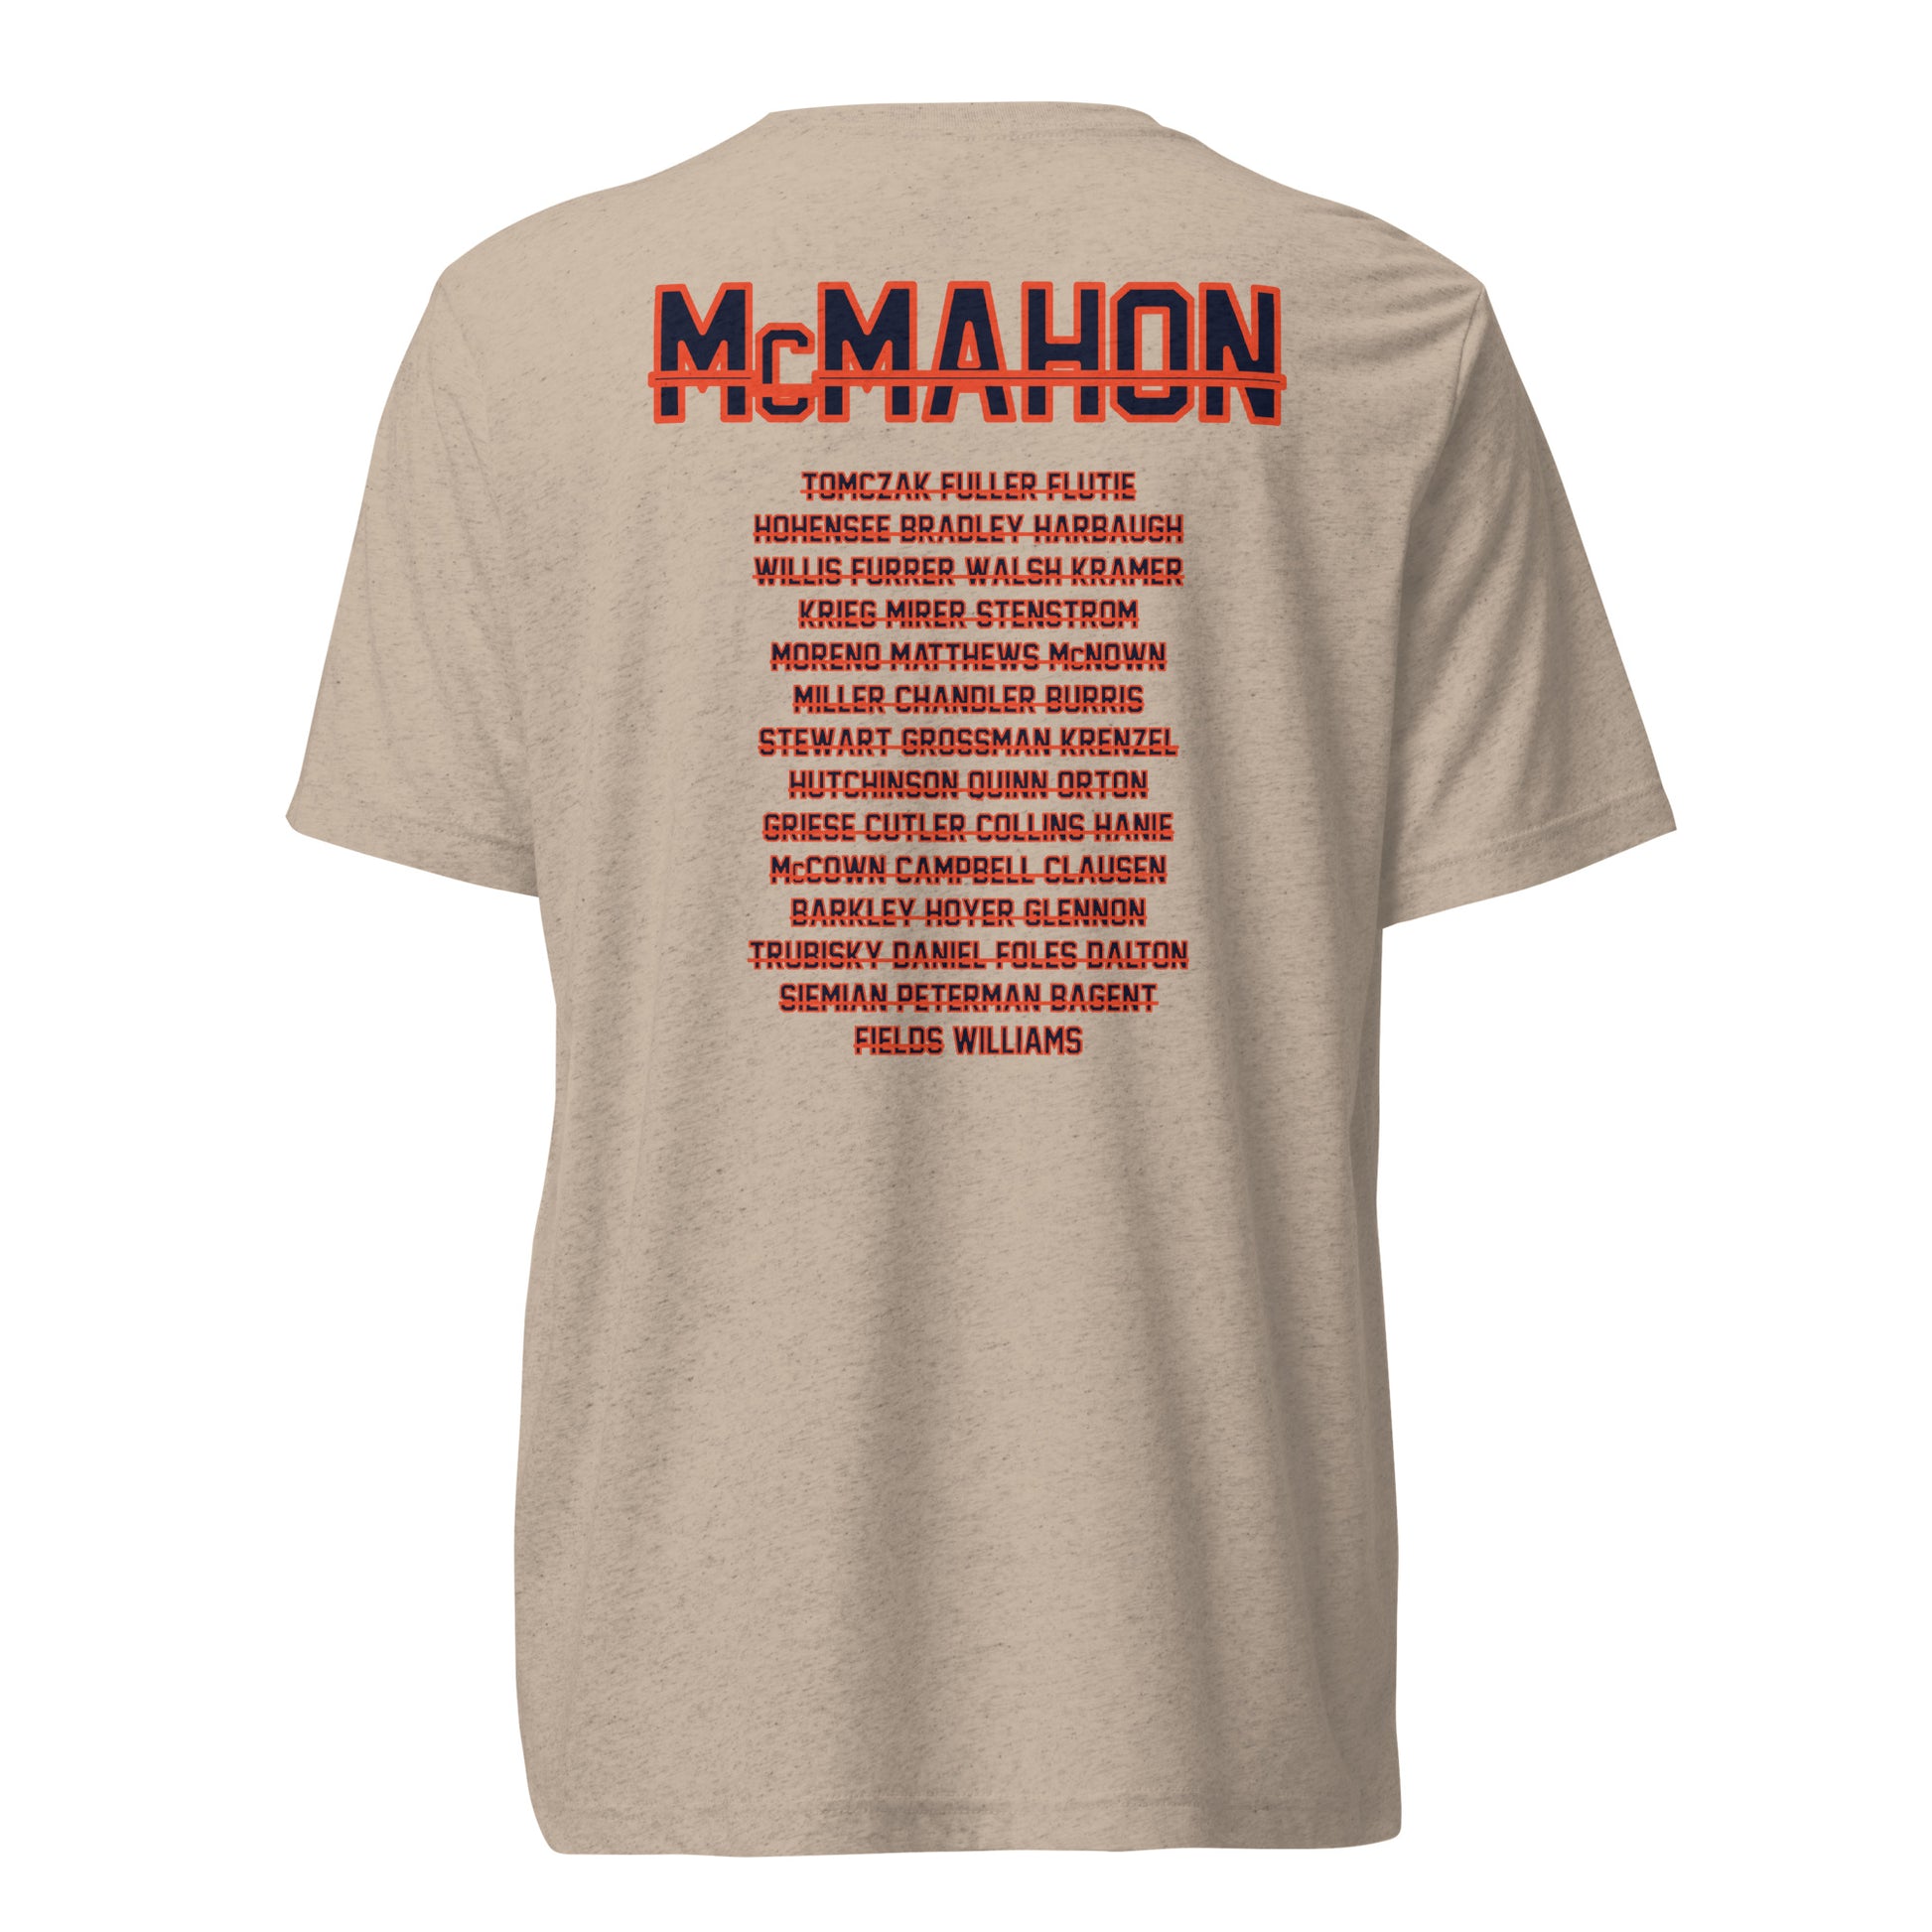 Chicago Bears Rebuilding Since 1986 Shirt in Tan Triblend - Back